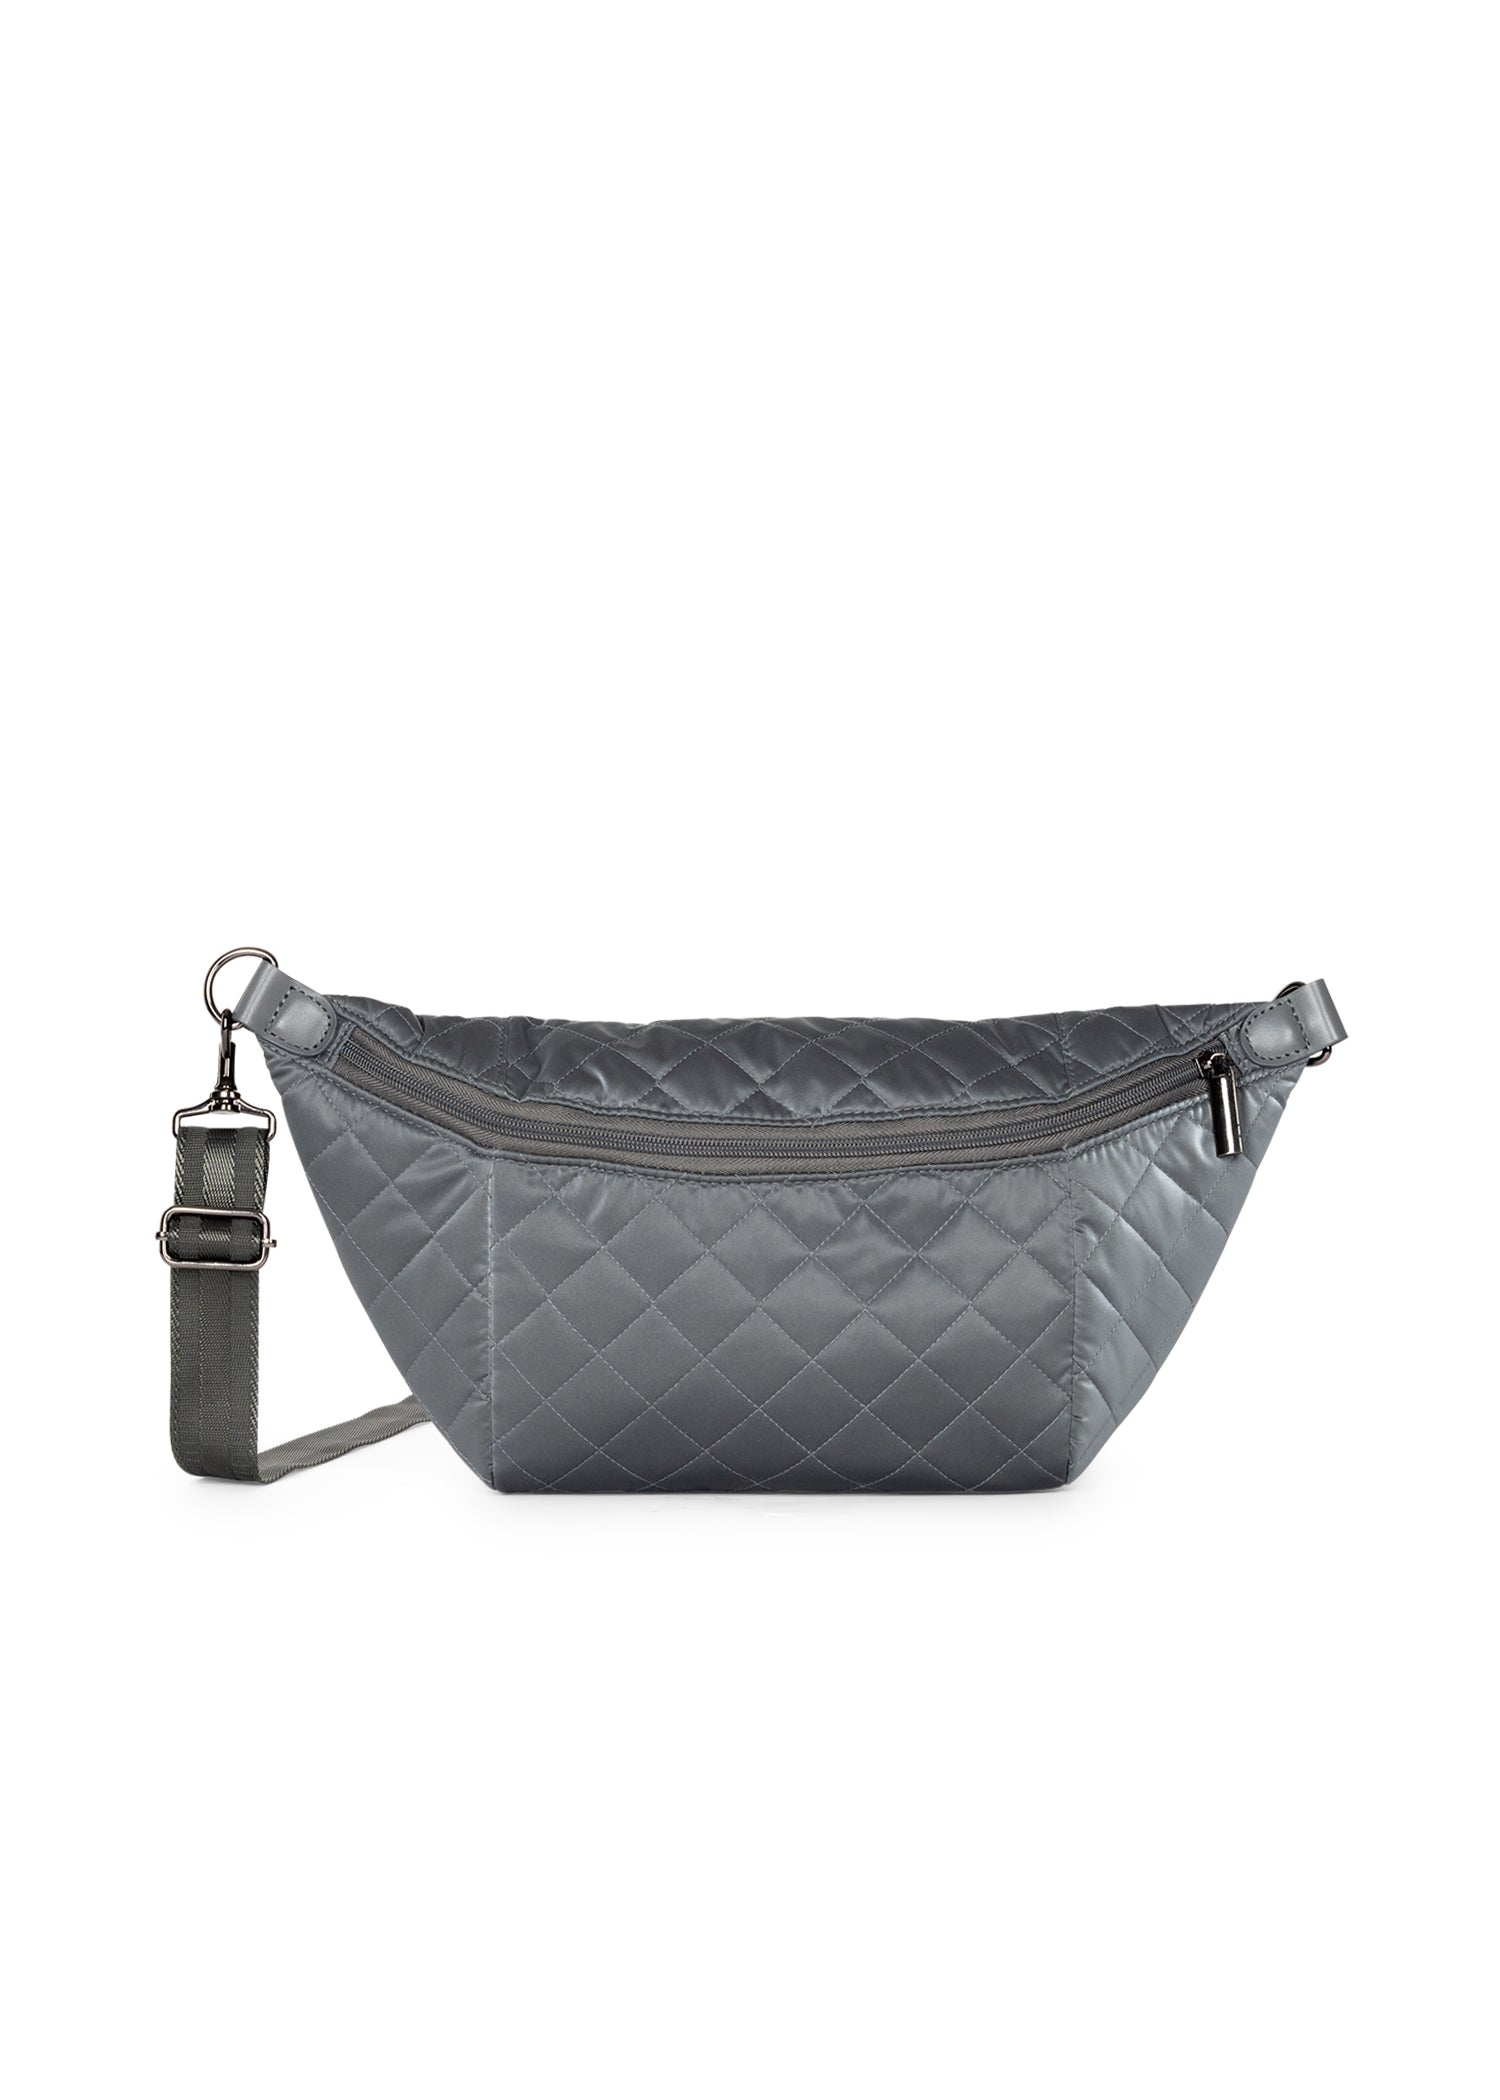 The Emily Shadow Sling Bag